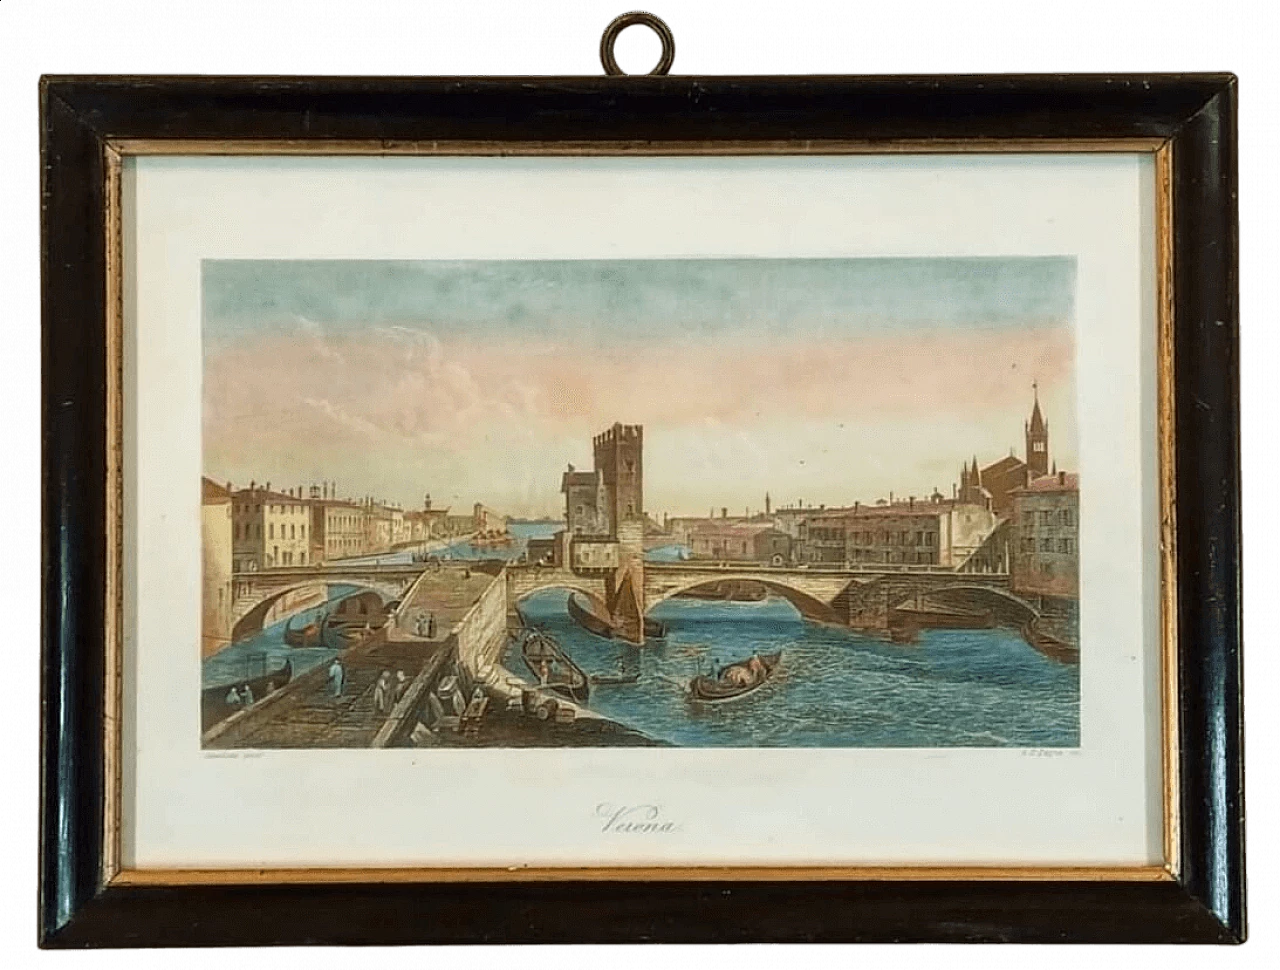 Albert Henry Payne, Verona, etching with watercolour, 1840 11